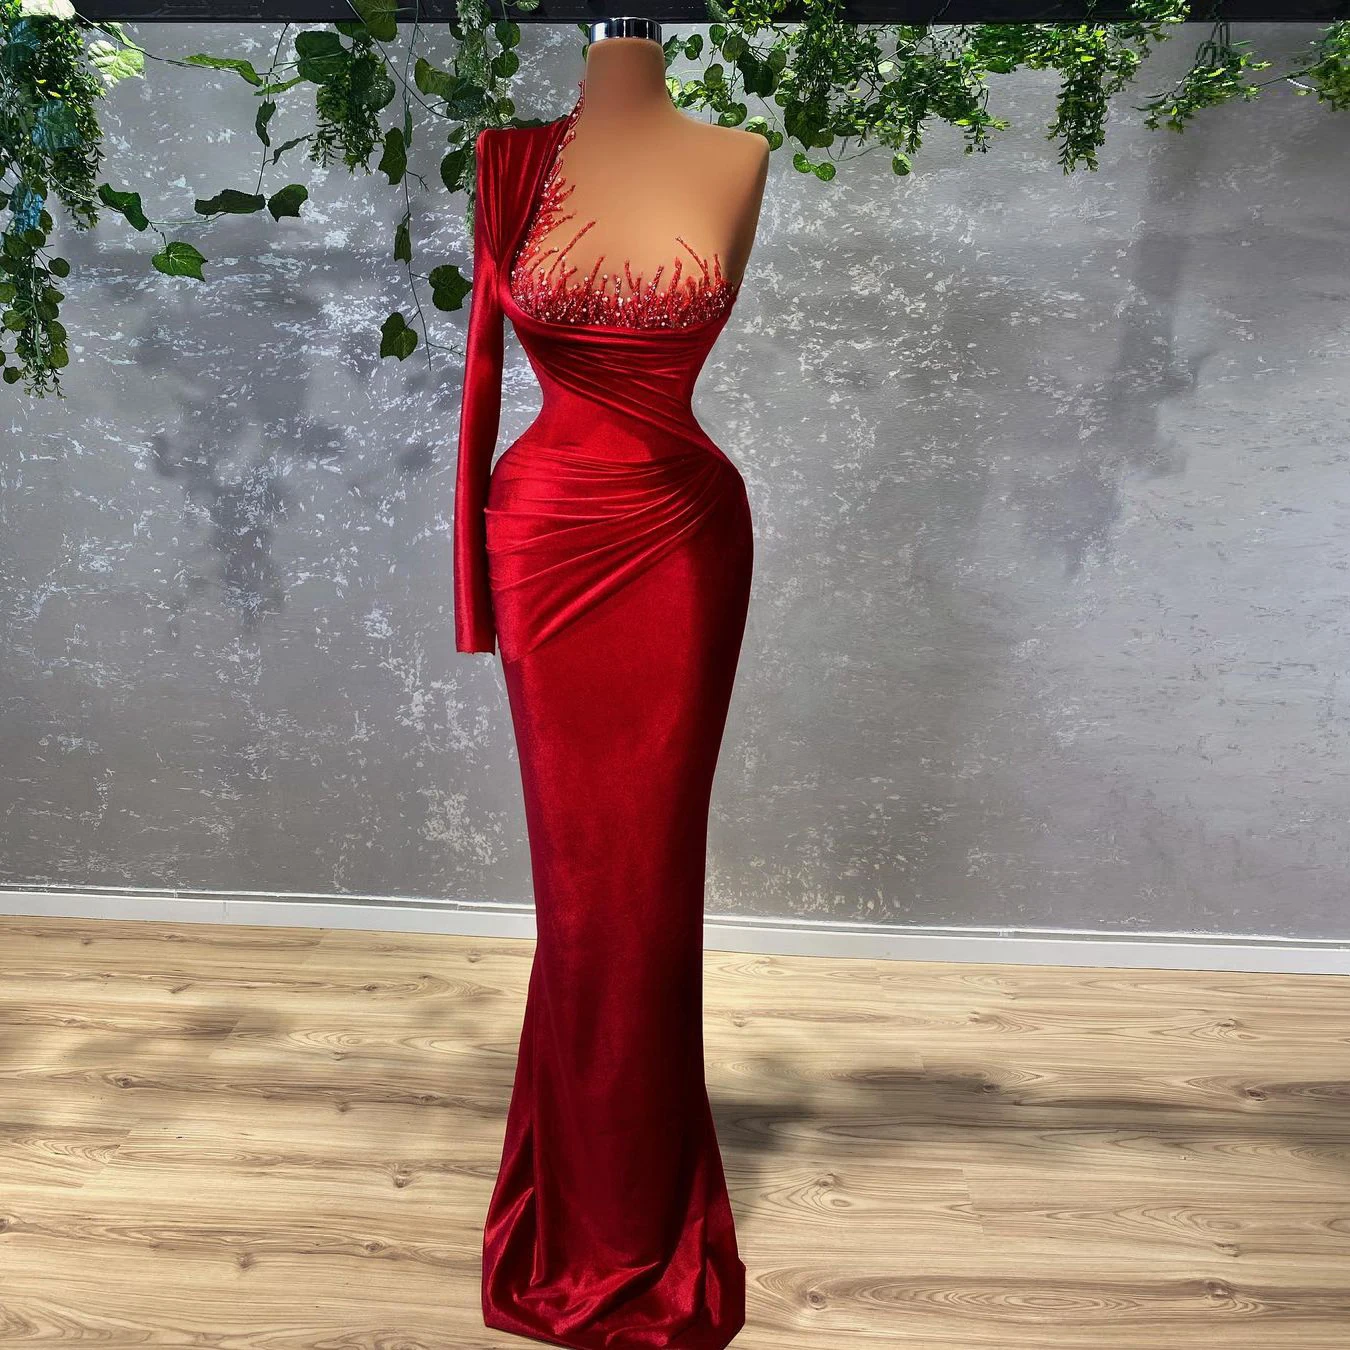 simple prom dresses Red Velvet Elegant Mermaid Prom Dresses One Shoulder Long Sleeve  Women Long Sexy Evening Pageant Gowns Plus Size Custom Made hot pink prom dress Prom Dresses